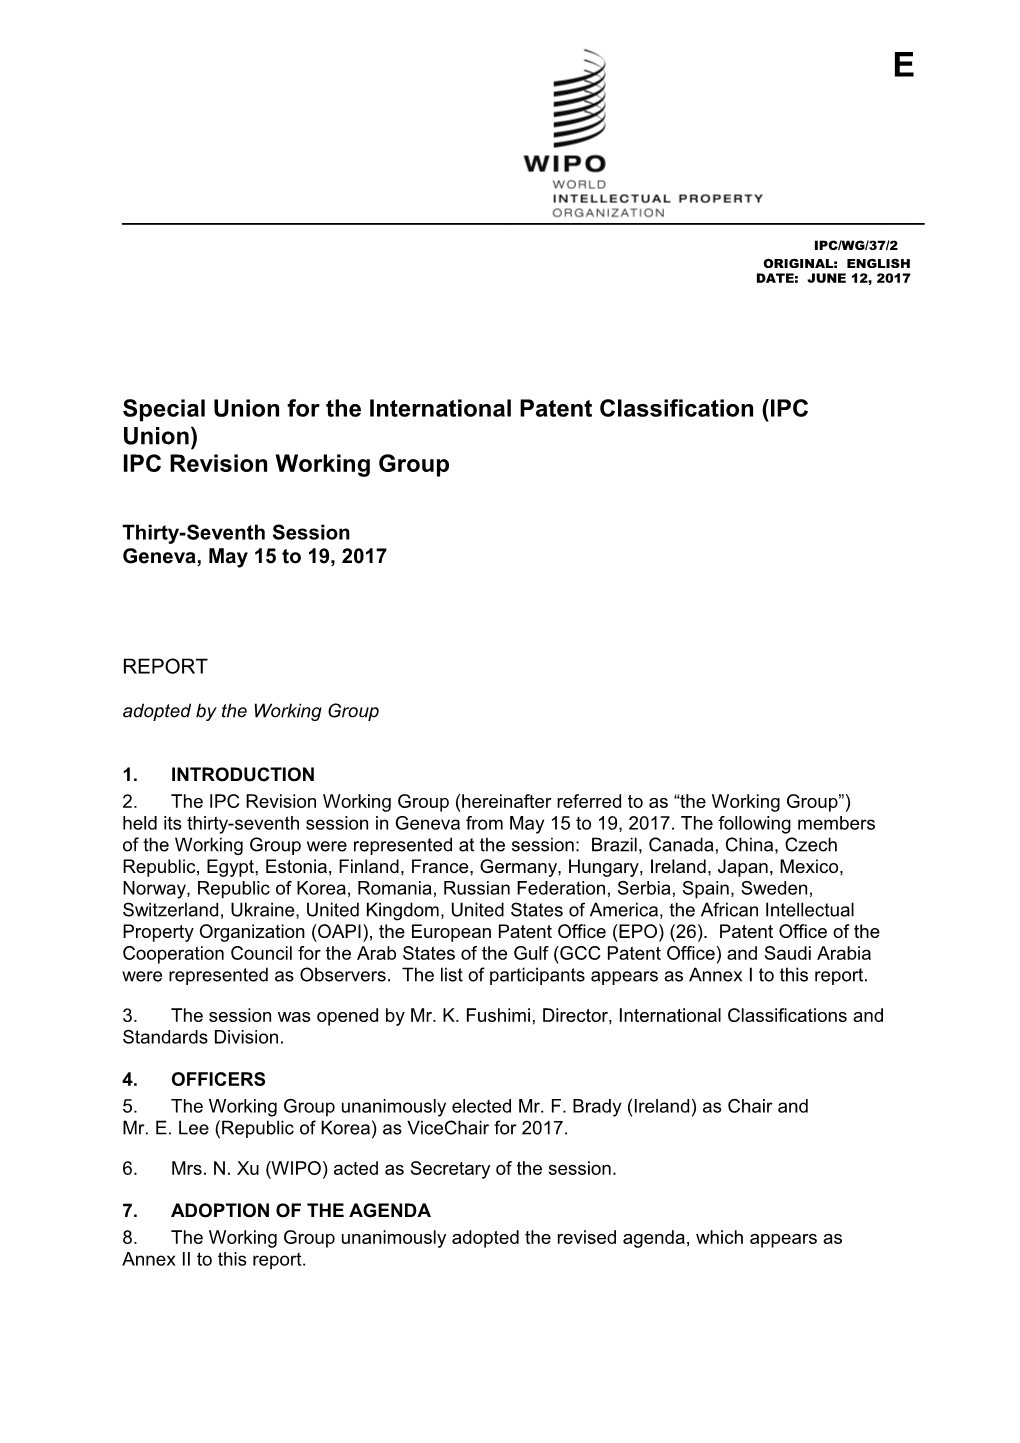 IPC/WG/37/2, Report, 37Th Session, IPC Revision Working Group